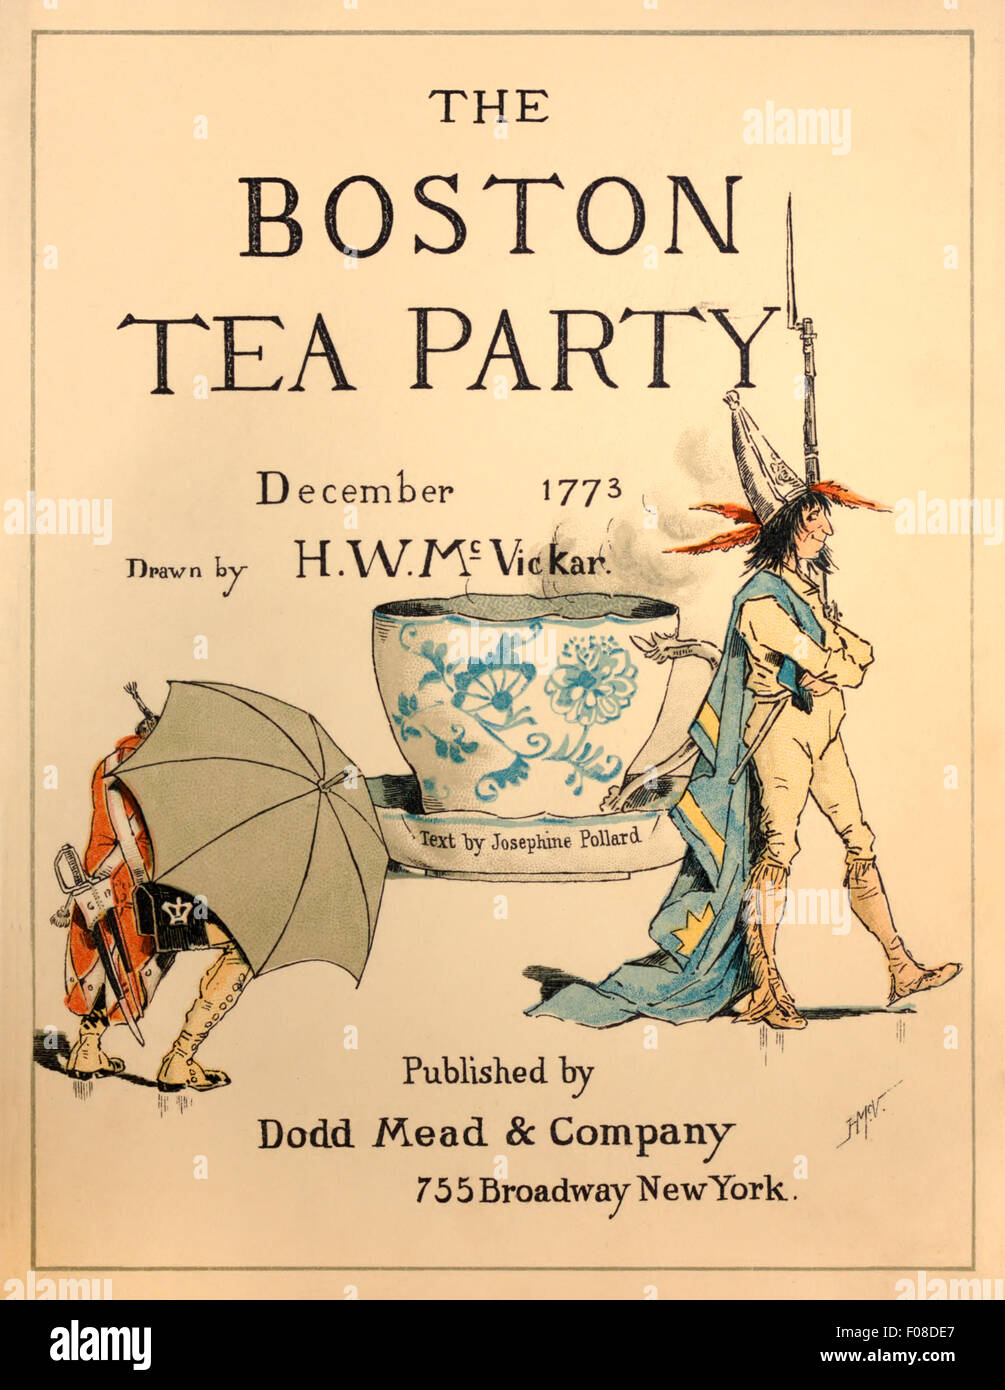 Title page from first edition of 'The Boston tea party, December 1773' by Harry Whitney McVickar (1860-1905) published in 1882. Depicts a British soldier hiding under an umbrella, a steaming cup of tea and one of the Sons of Liberty. Illustration by Josephine Pollard (1834-1892). See description for more information. Stock Photo